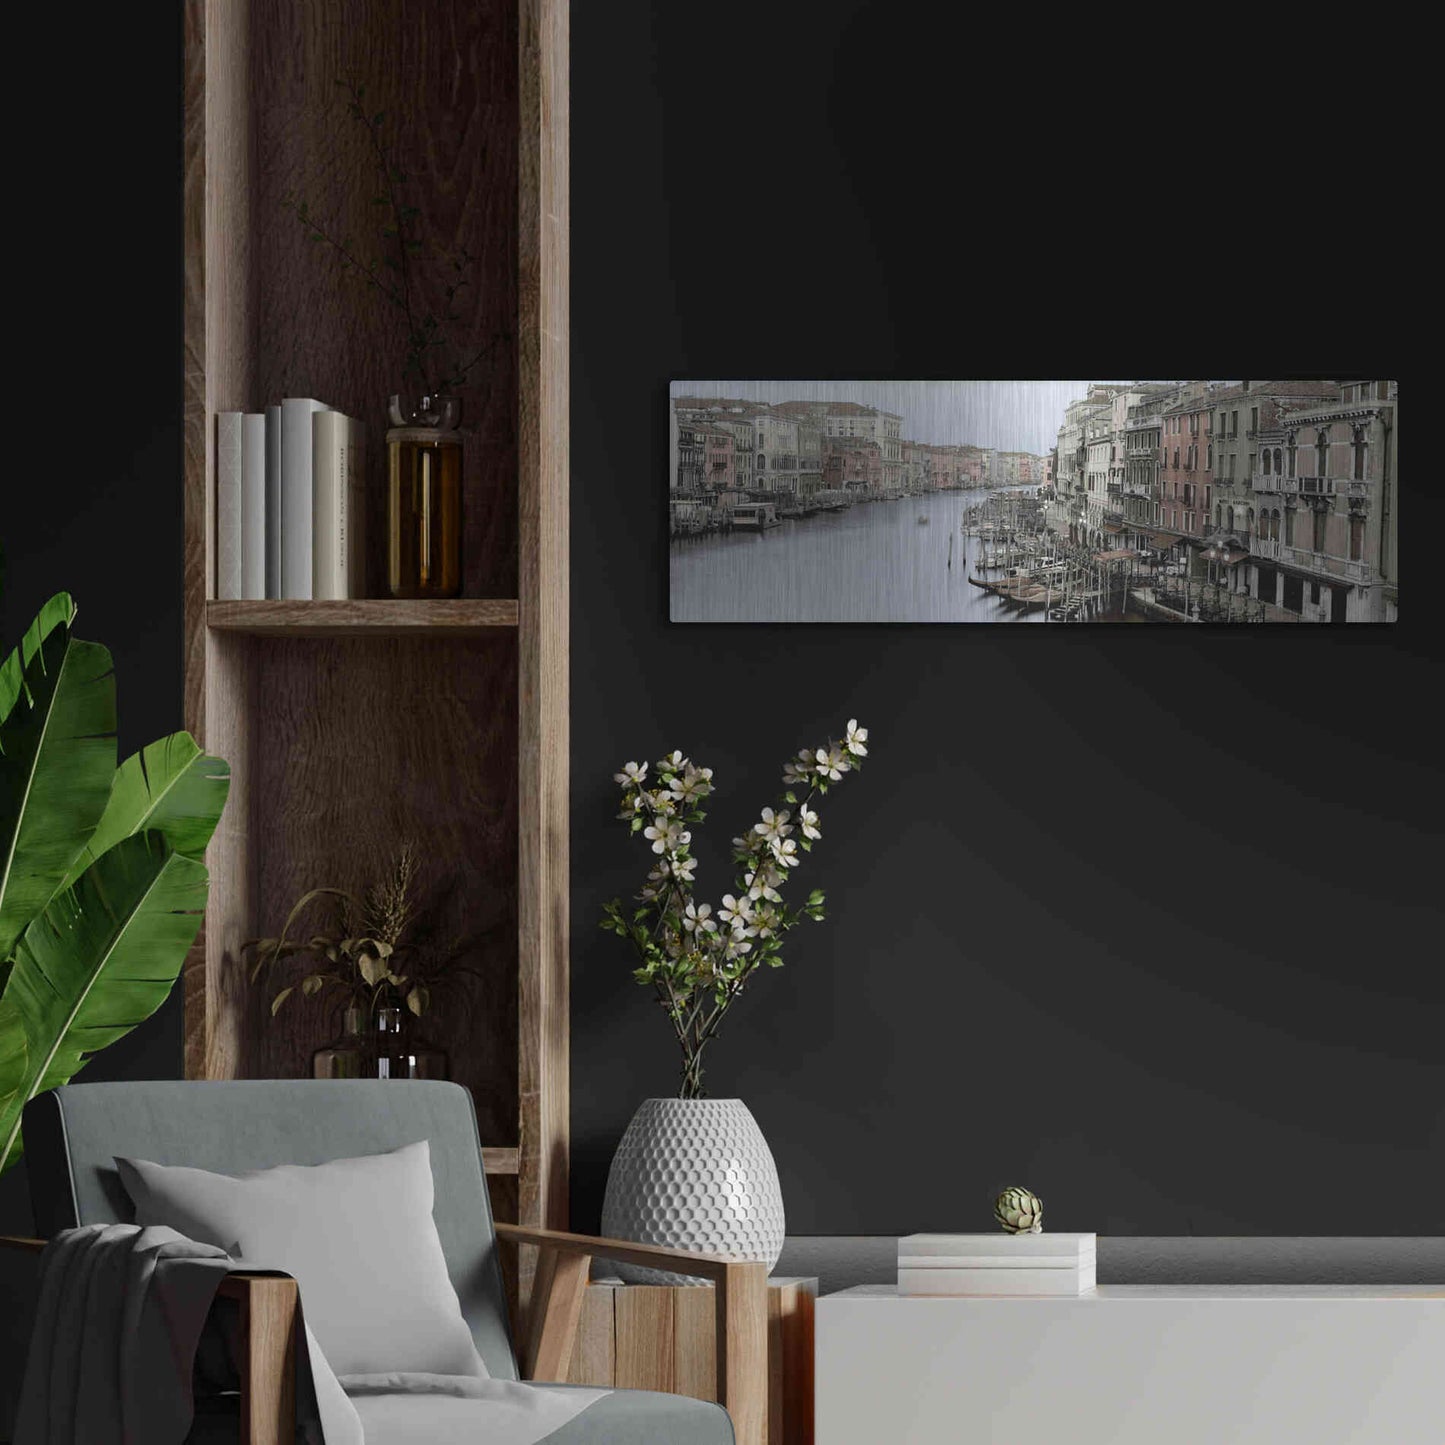 Luxe Metal Art 'Morning on the Grand Canal' by Alan Blaustein Metal Wall Art,36x12